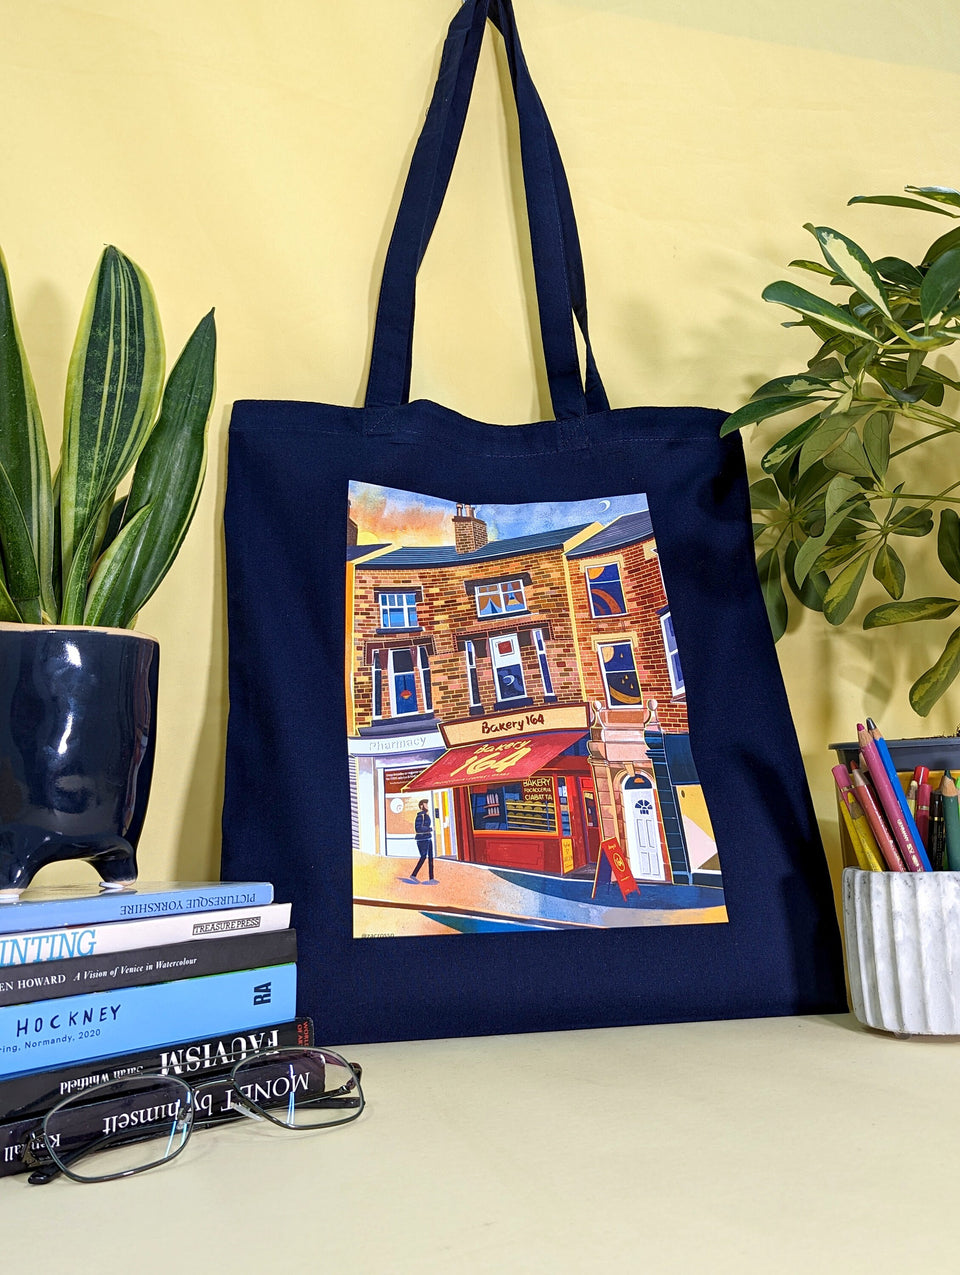 Leeds Bakery 164 Tote Bag, Natural Cotton or Navy Blue Cotton